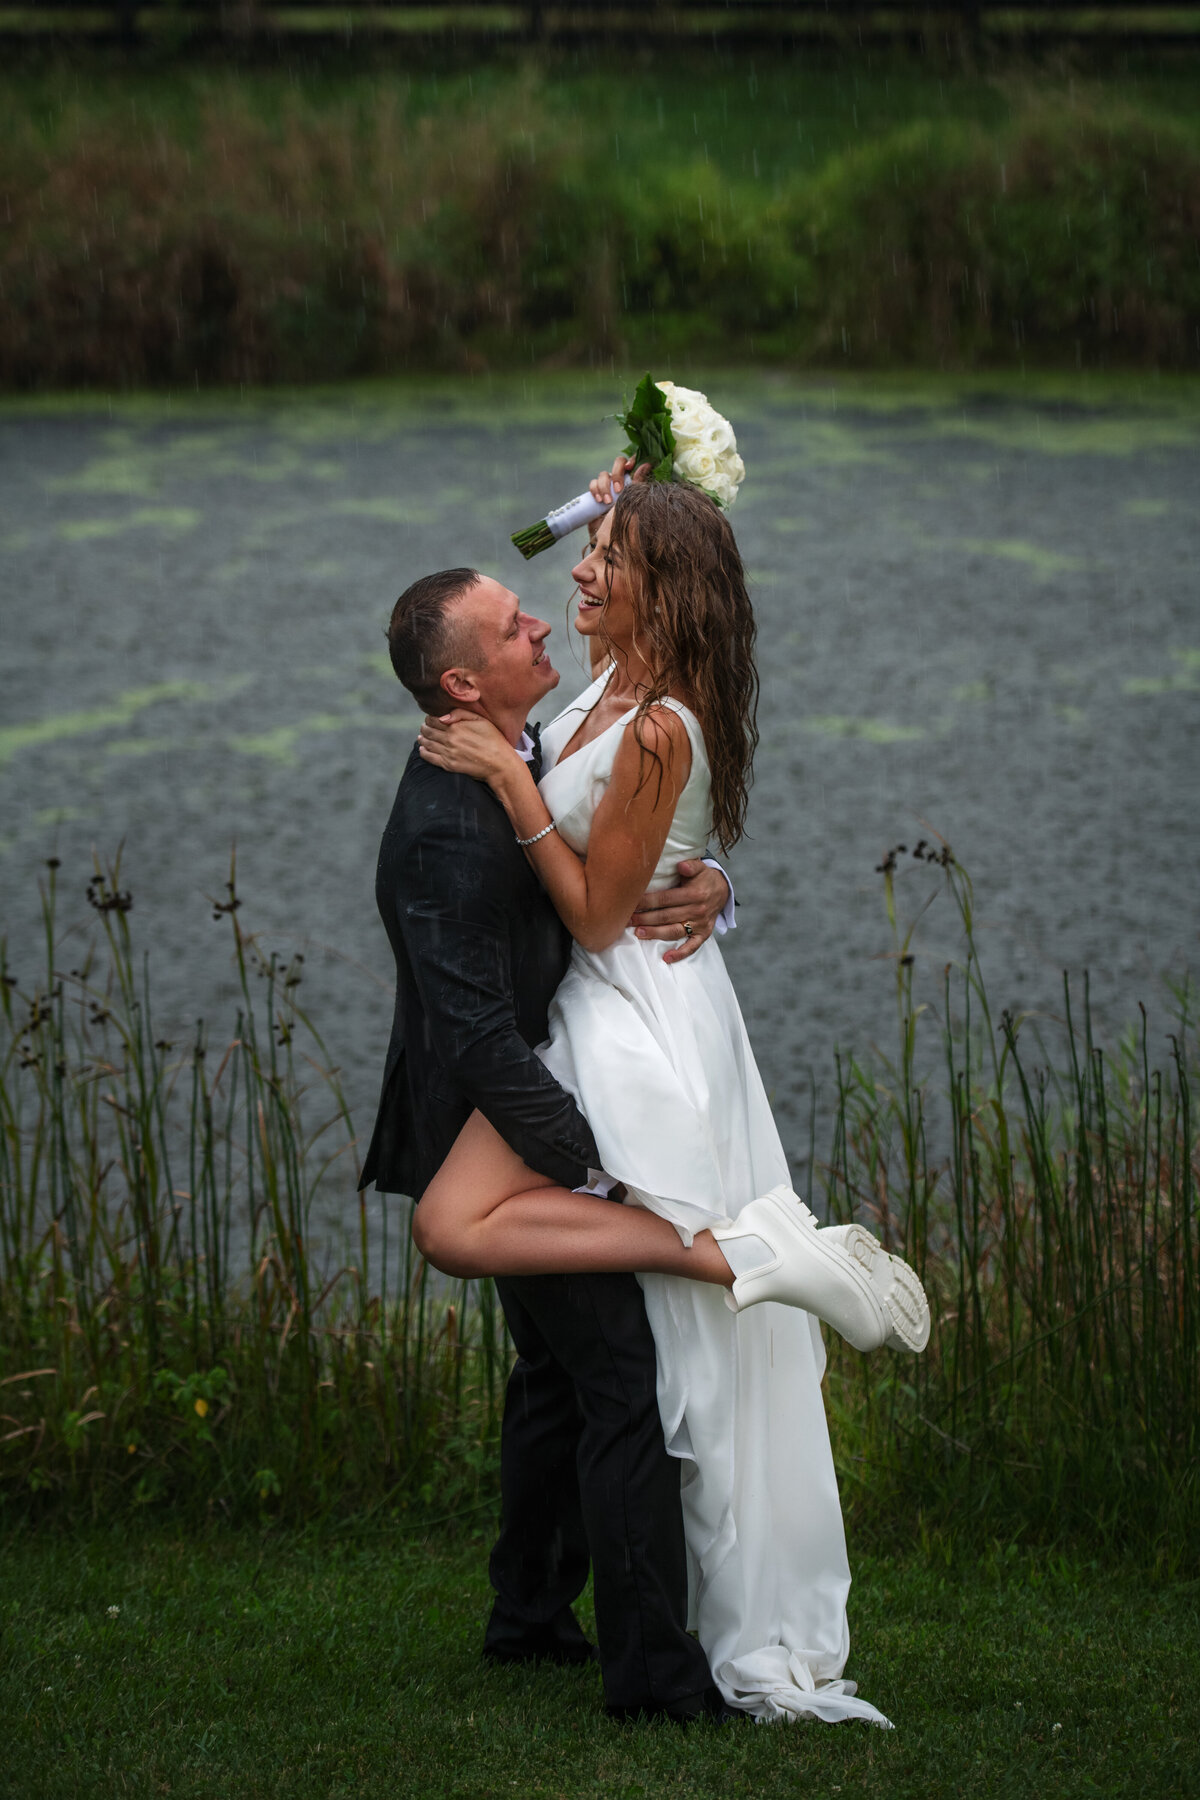 Groom picked up her bride and getting soaked on their rainy wedding day